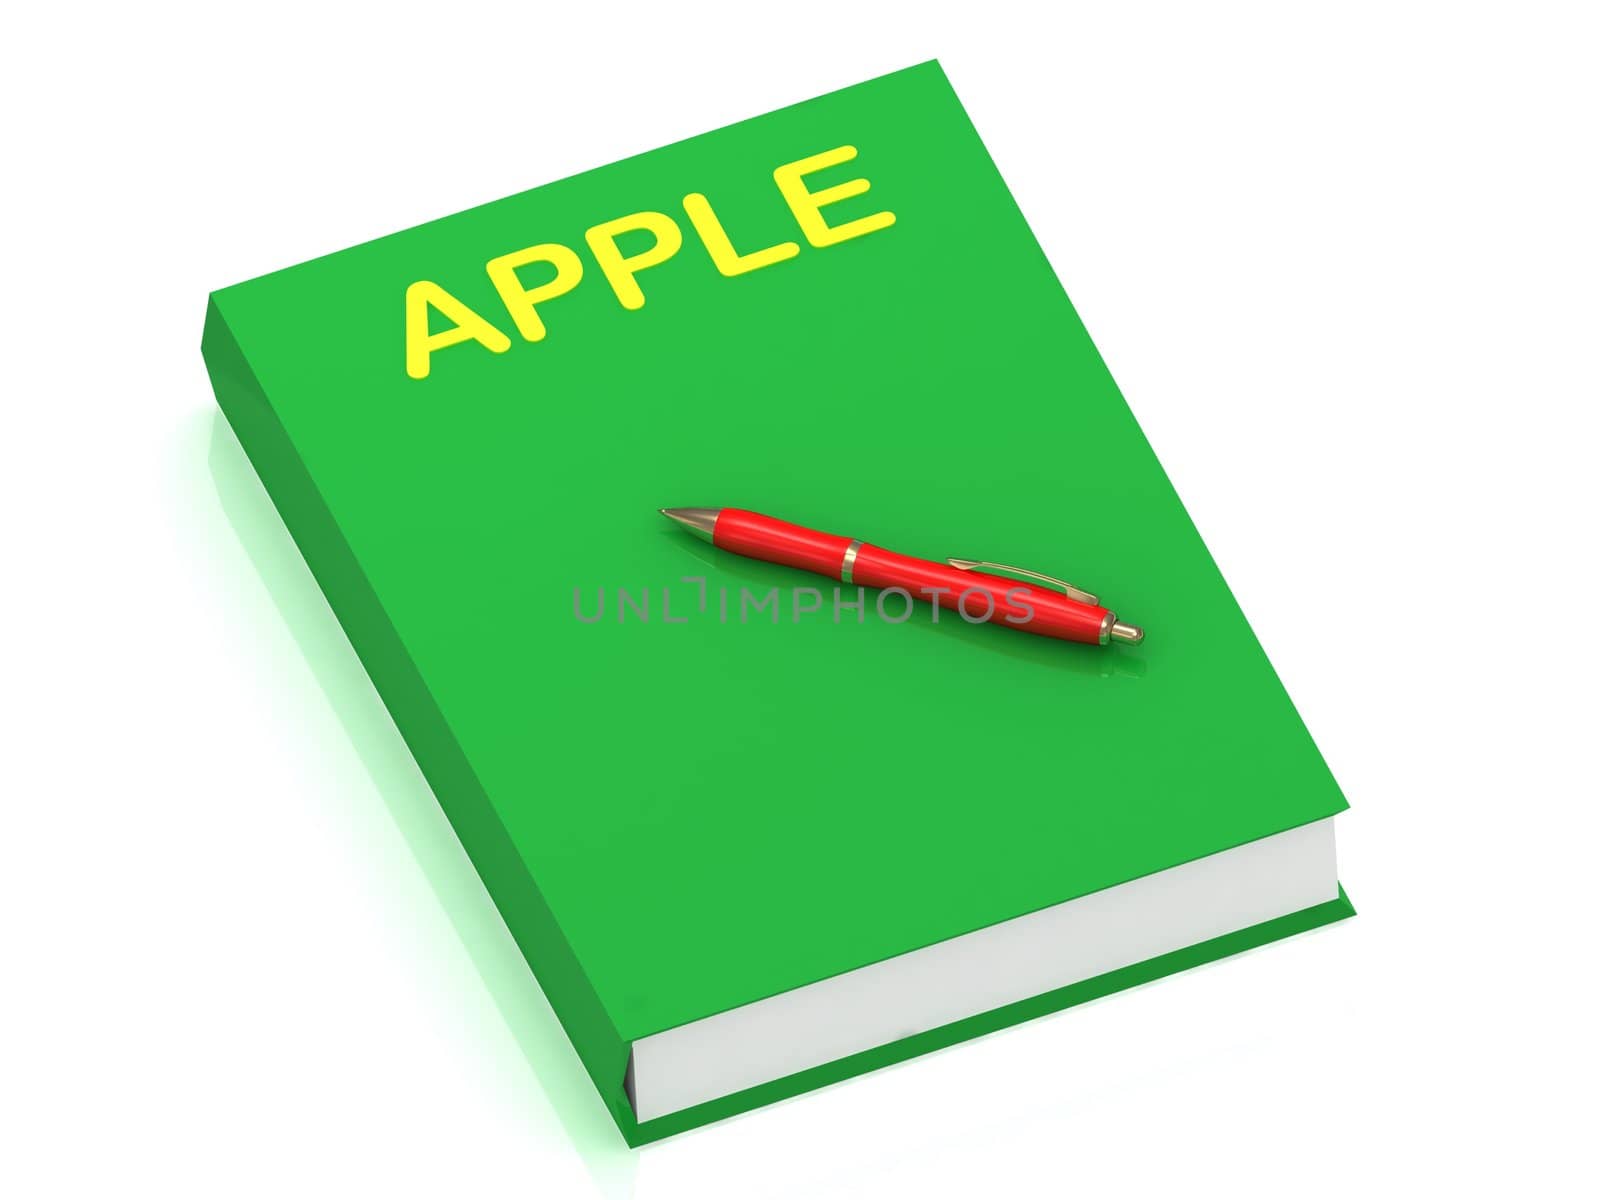 APPLE inscription on cover book and red pen on the book. 3D illustration isolated on white background